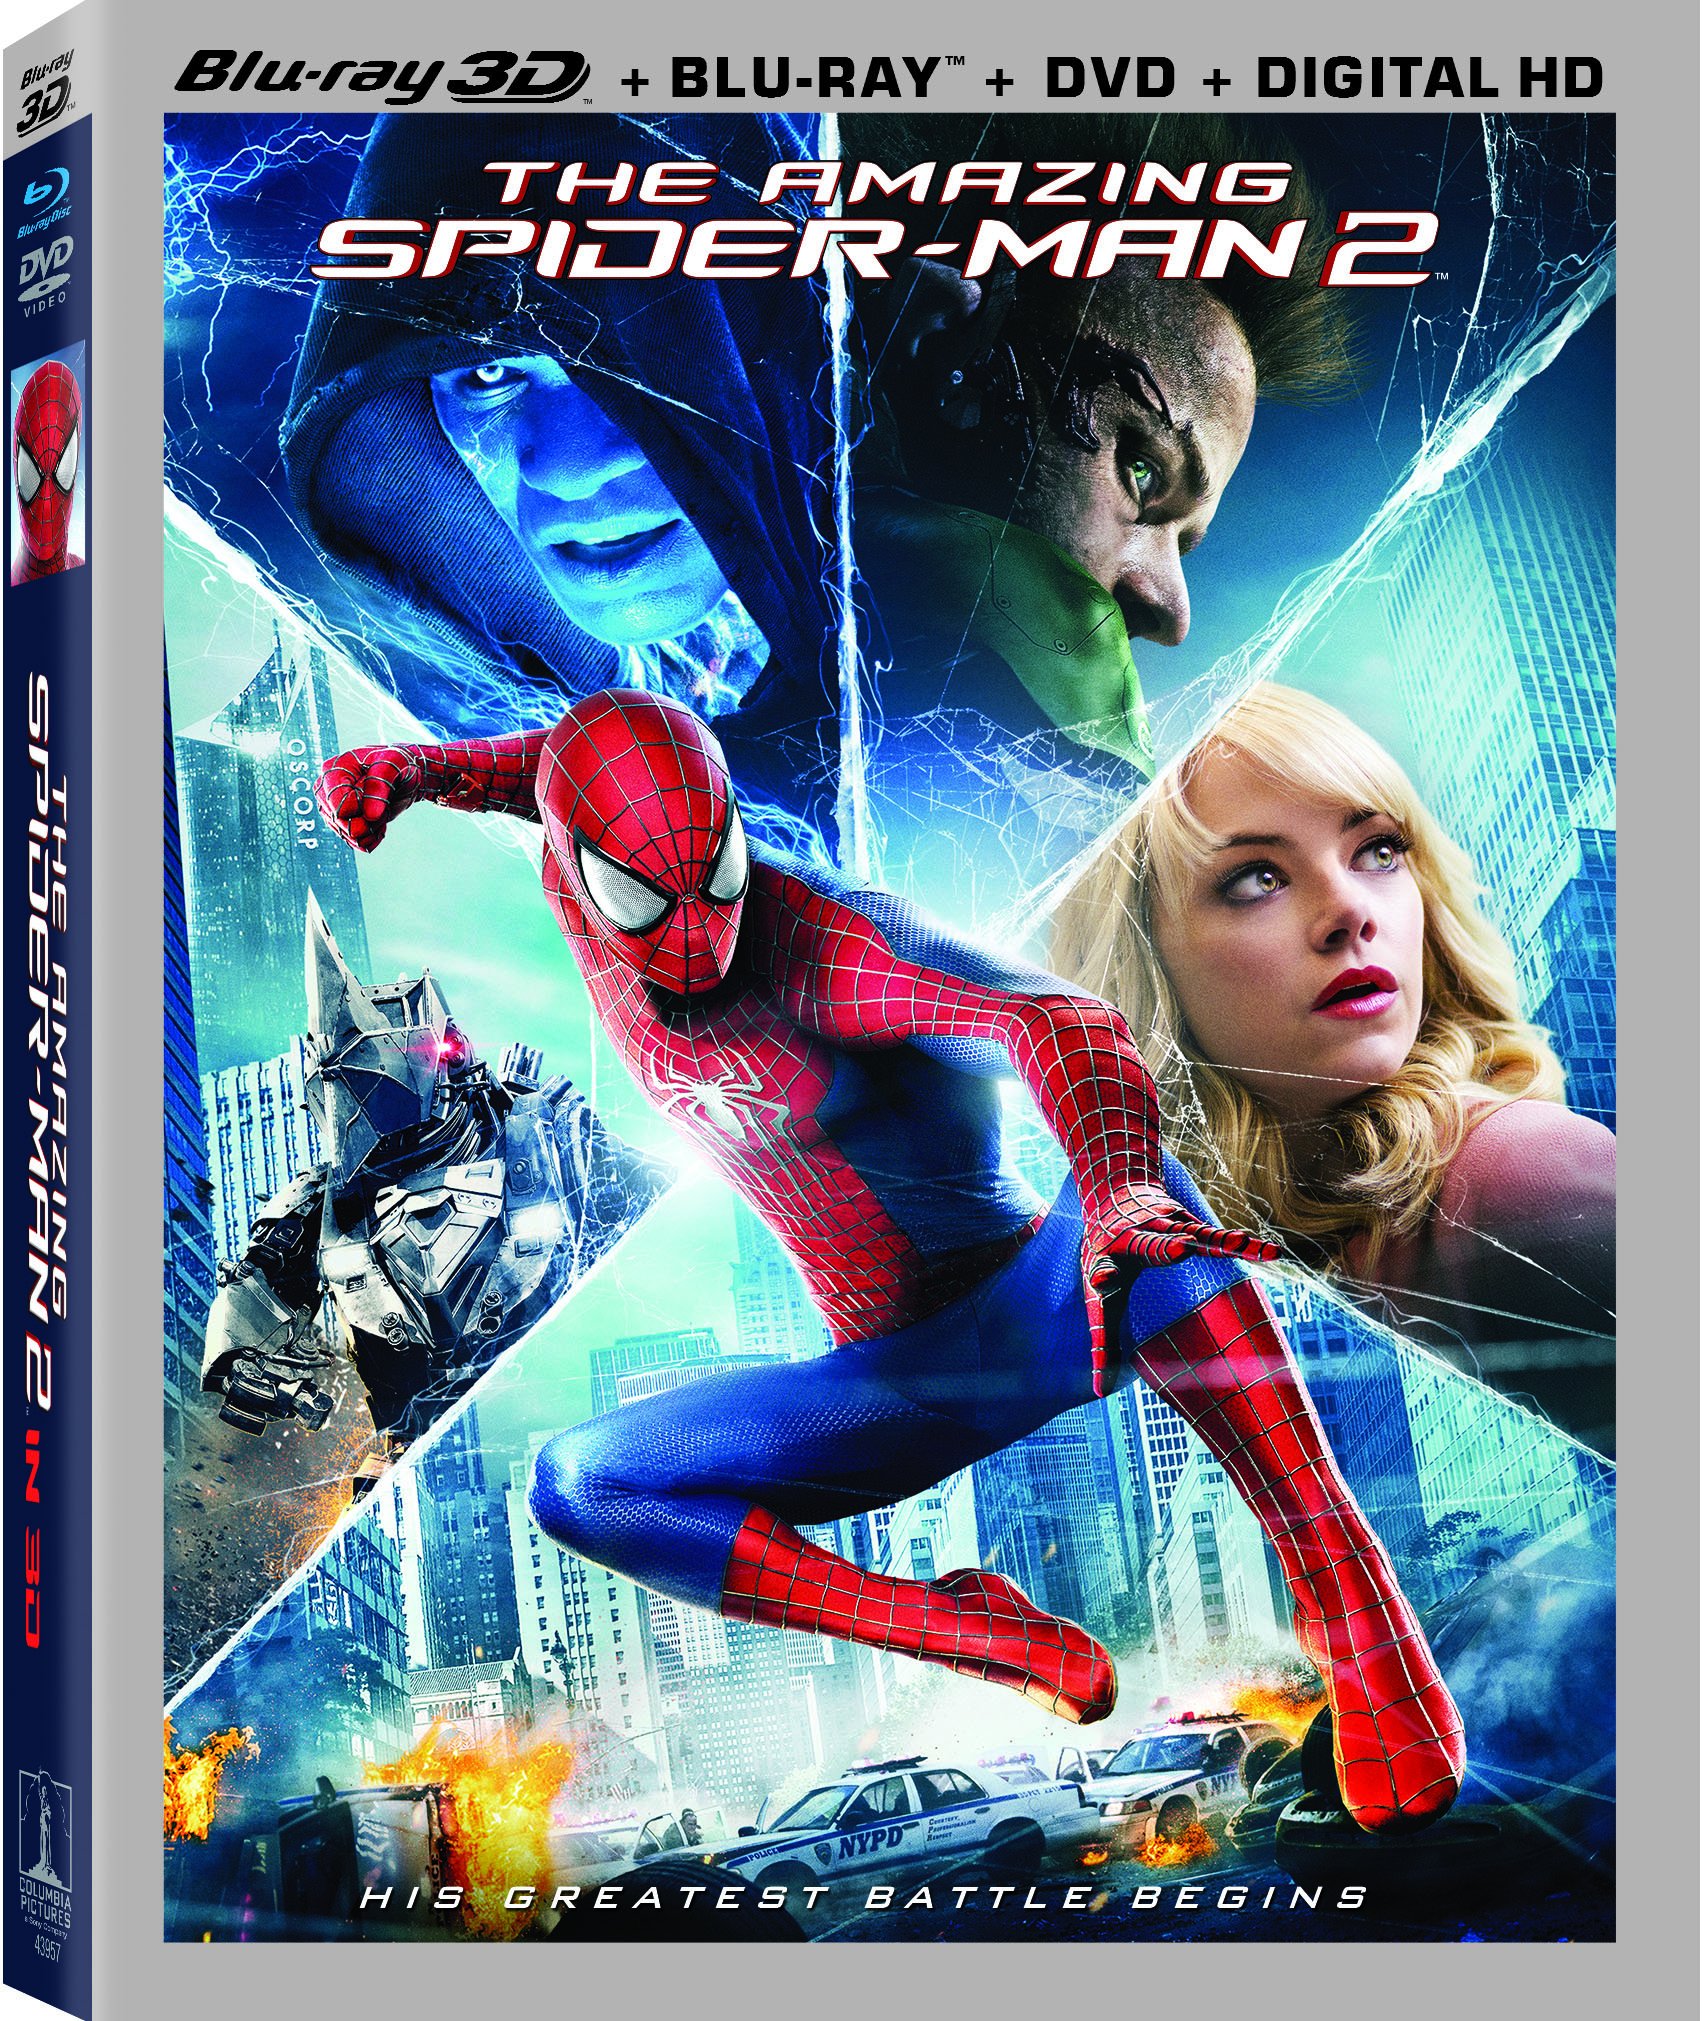 The Amazing Spider-Man 2 DVD Release Date August 19, 2014